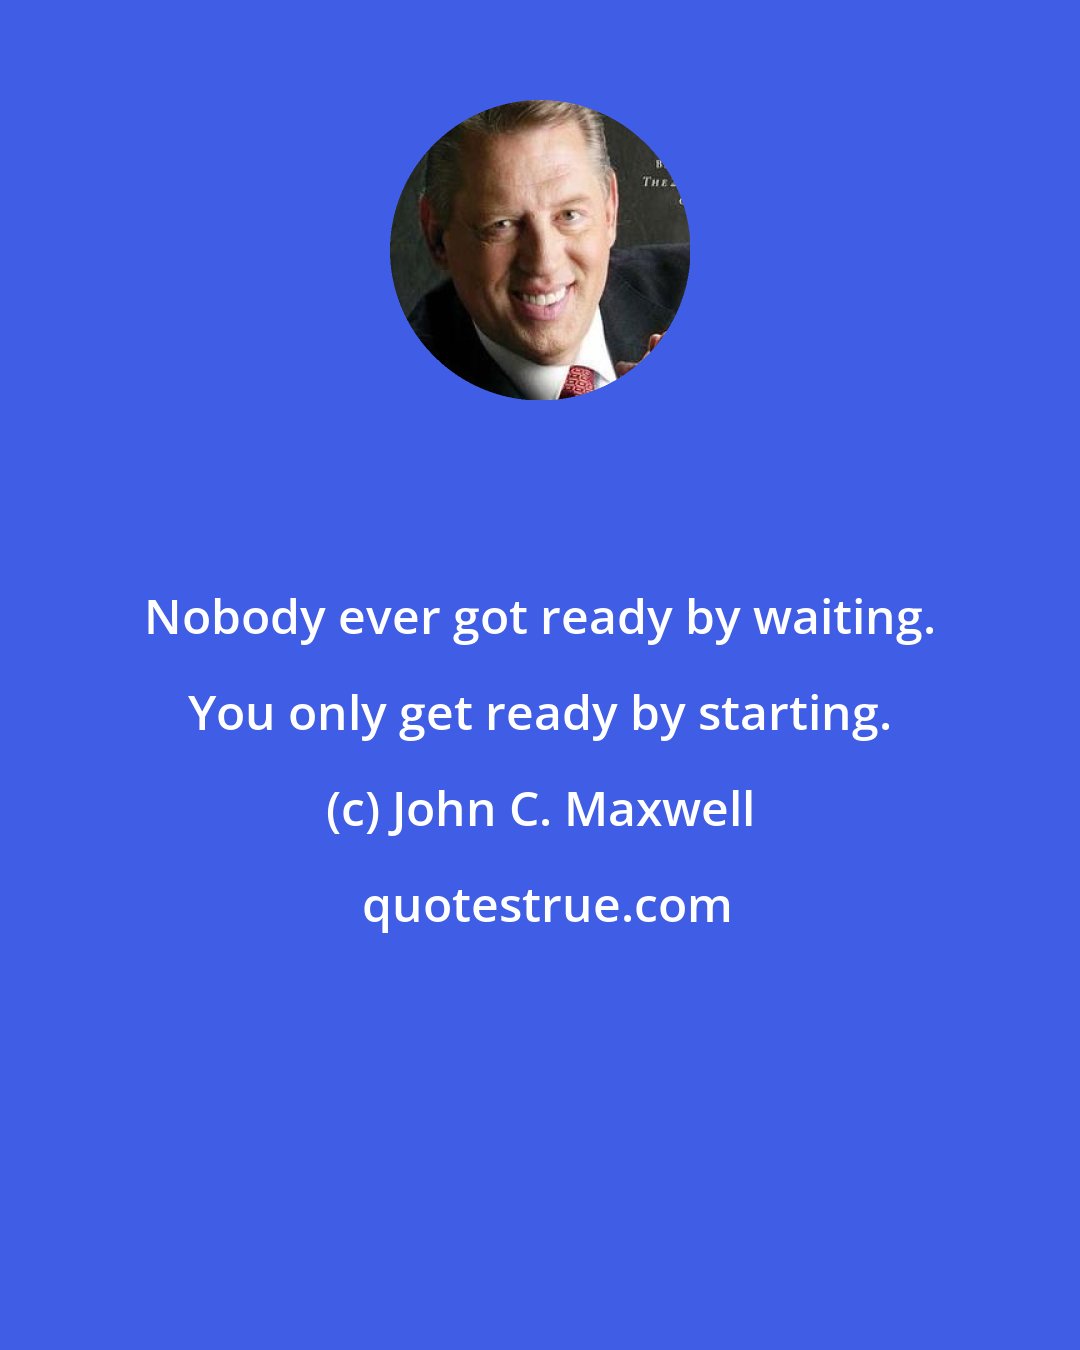 John C. Maxwell: Nobody ever got ready by waiting. You only get ready by starting.